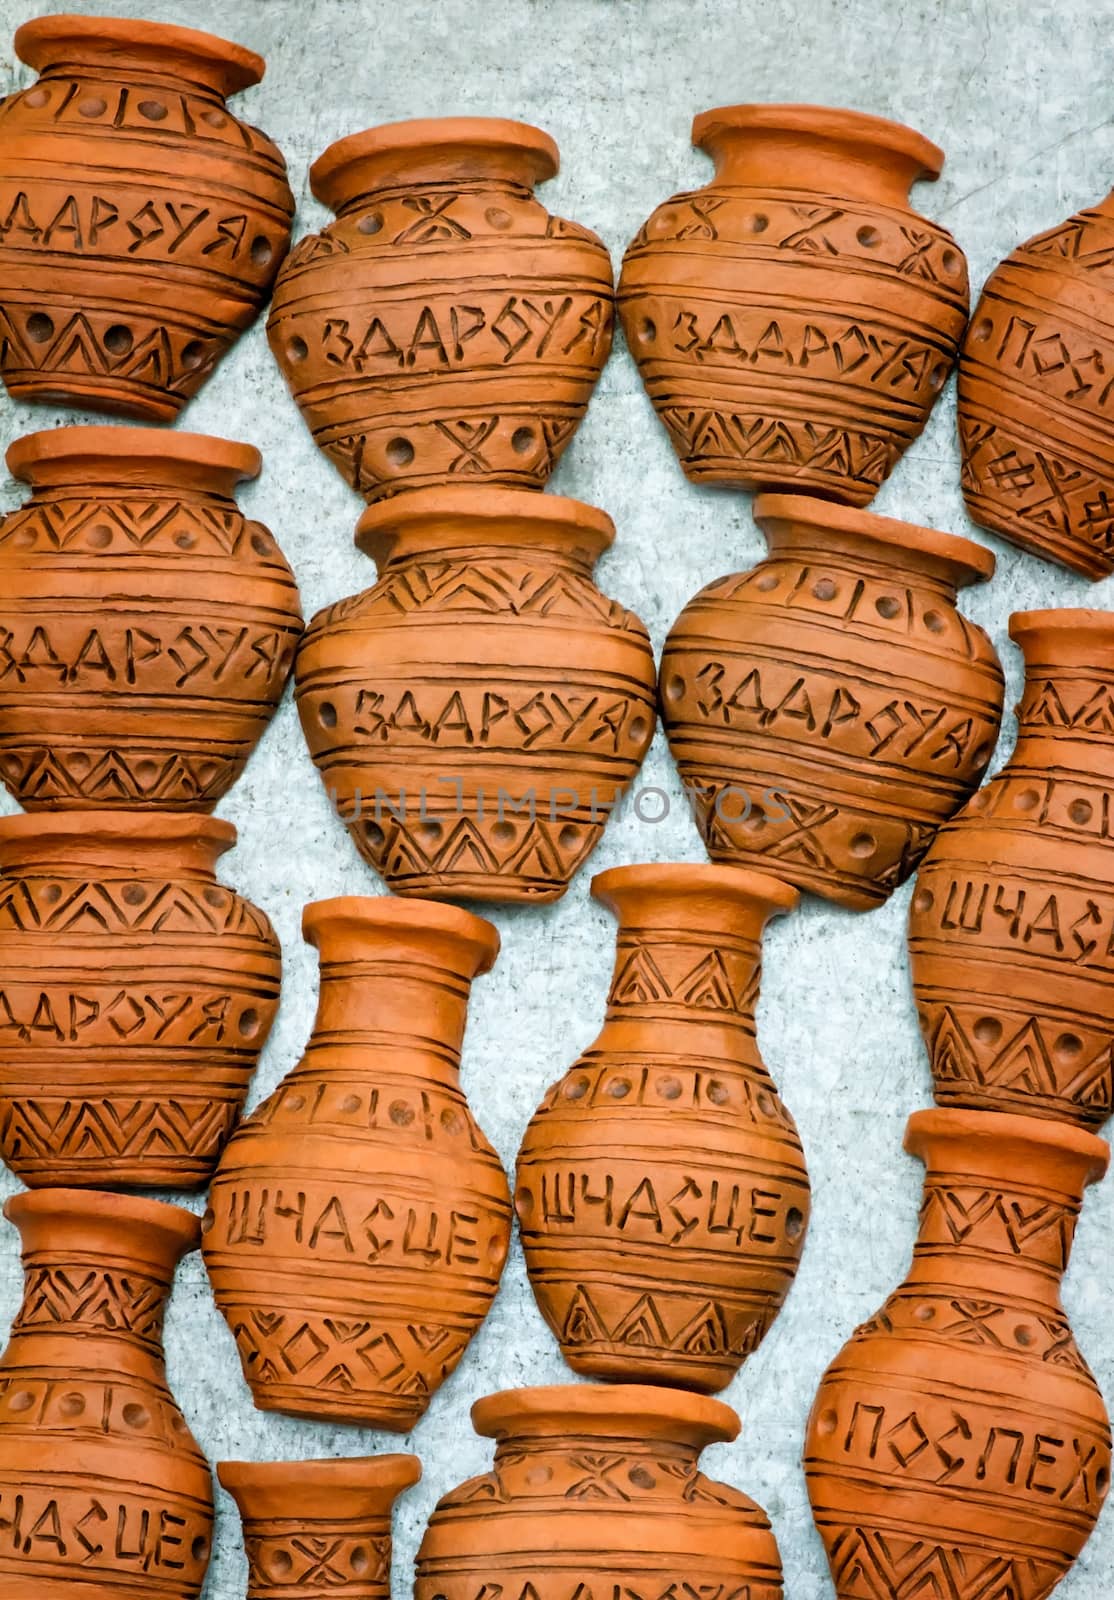 Souvenirs in the form of ware with the inscriptions wishing heal by georgina198